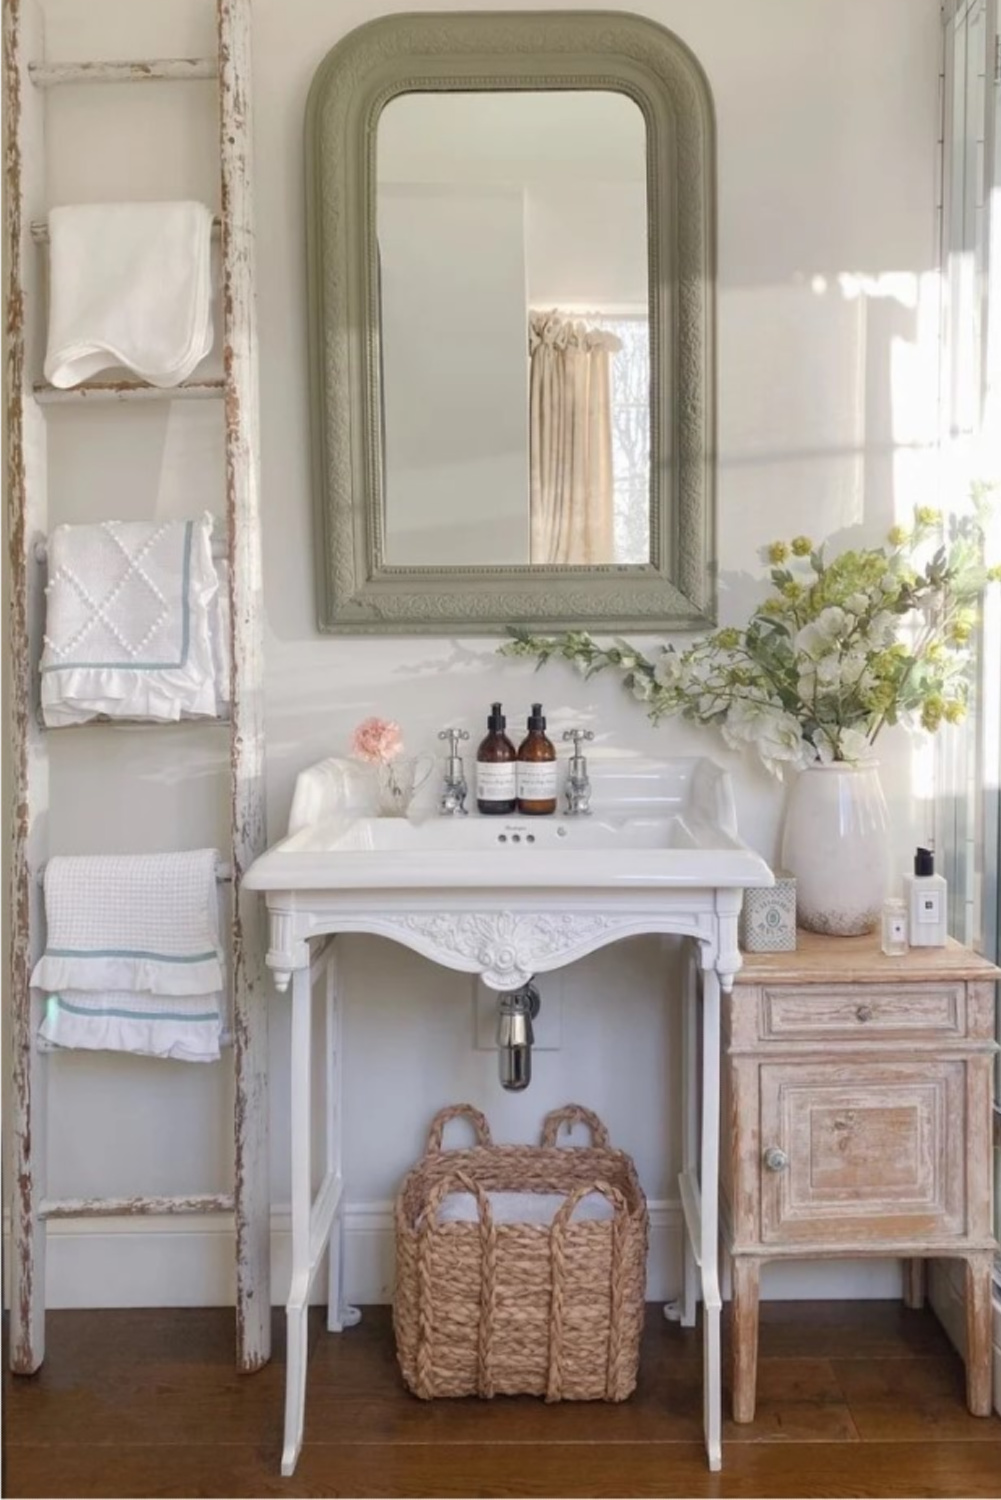 Strong White Farrow & Ball paint color on walls of English country bath by @wallflower_cottage. #strongwhite